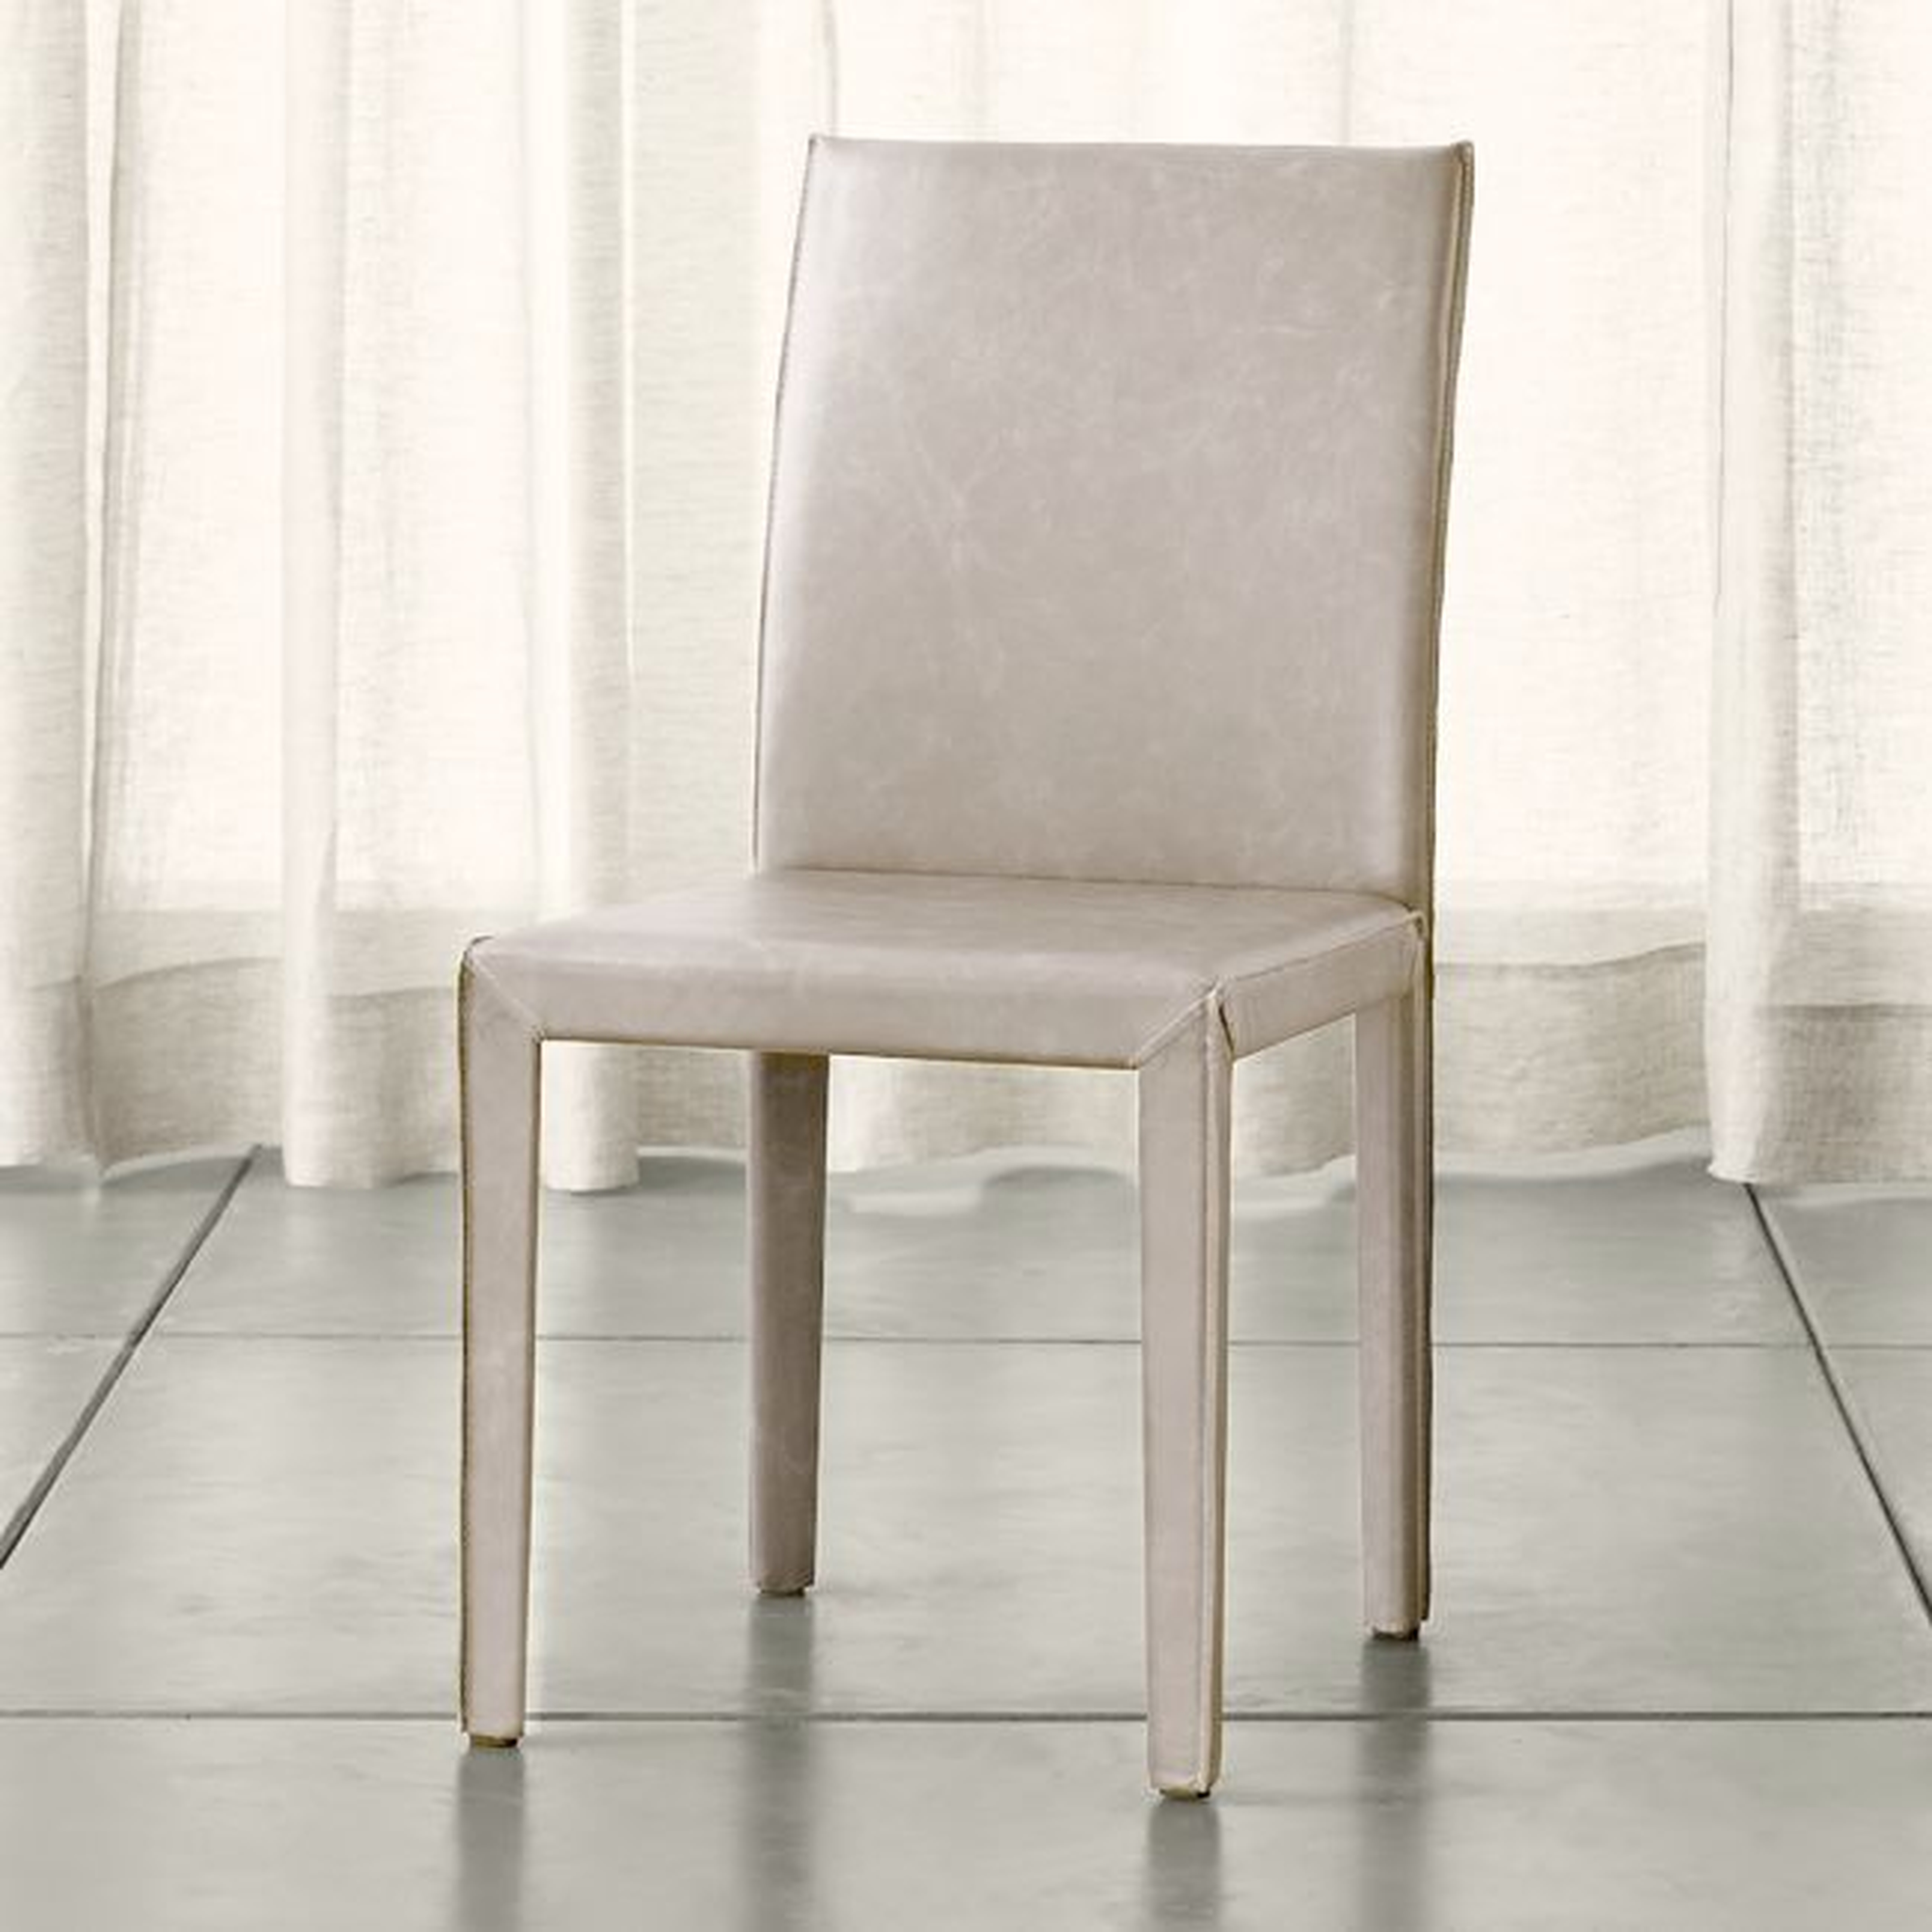 Folio Sand Top-Grain Leather Dining Chair - Crate and Barrel